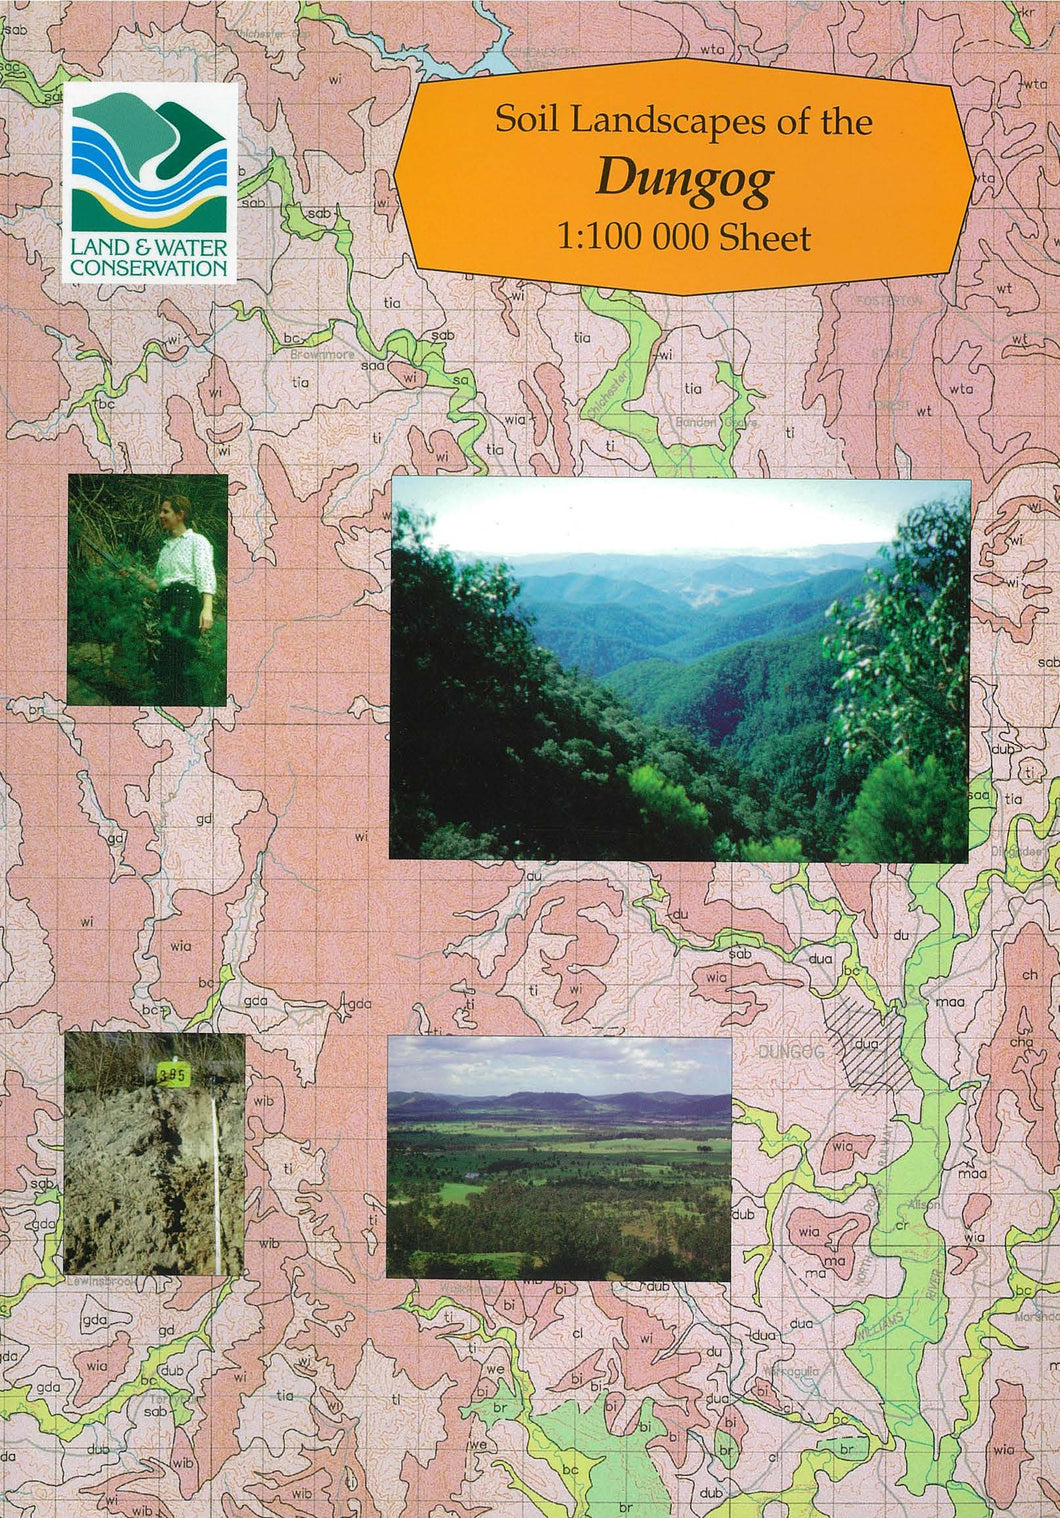 Soil Landscapes of the Dungog 1:100 000 Sheet report cover